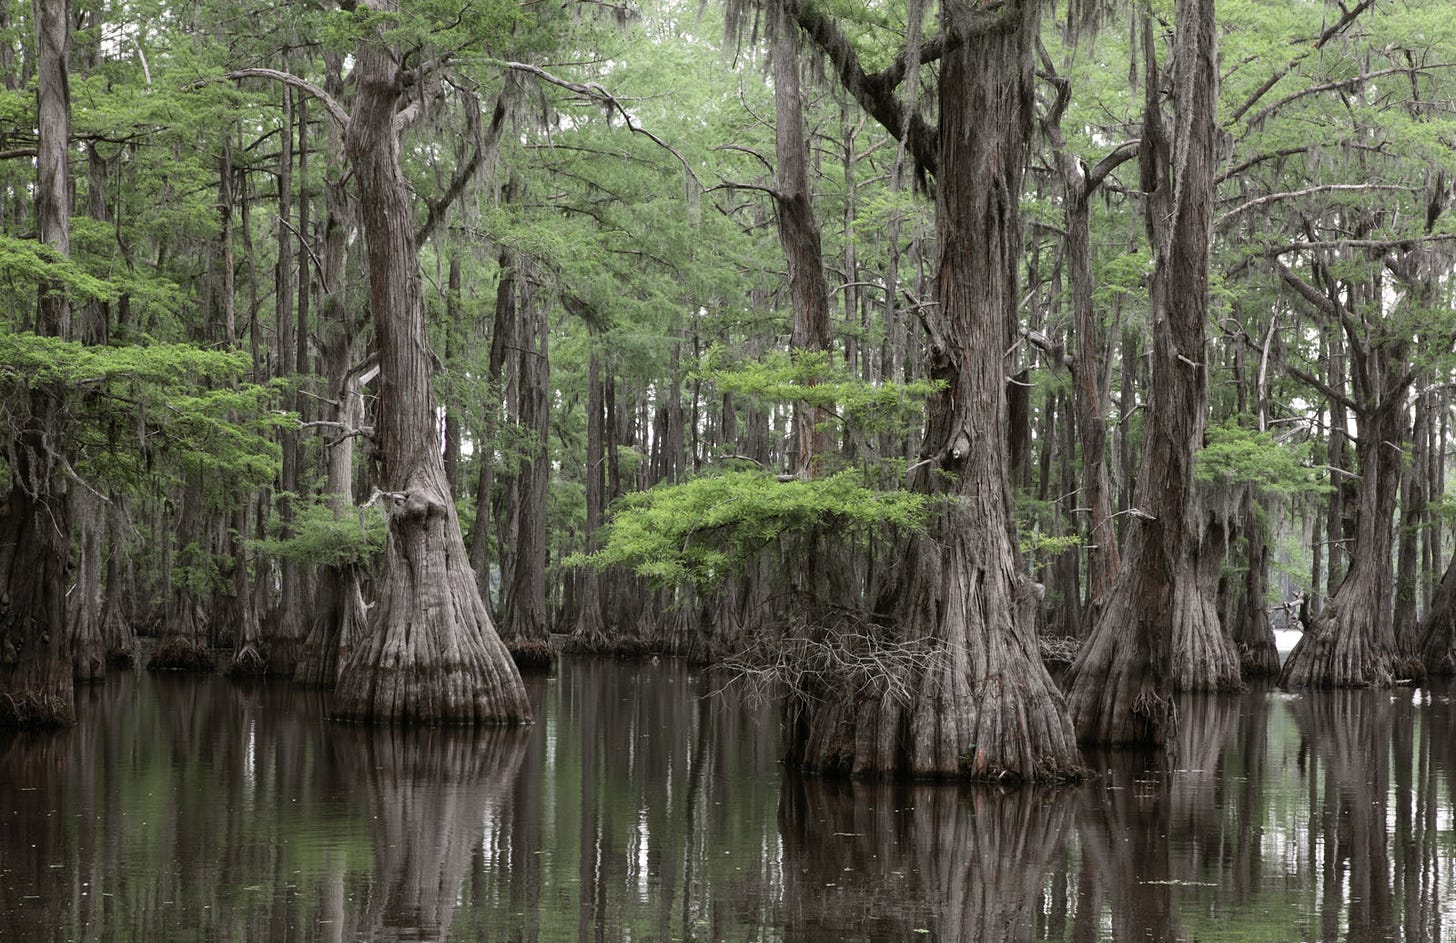 Ancient bald cypress trees with green canopies and wide bases growing from a black river.